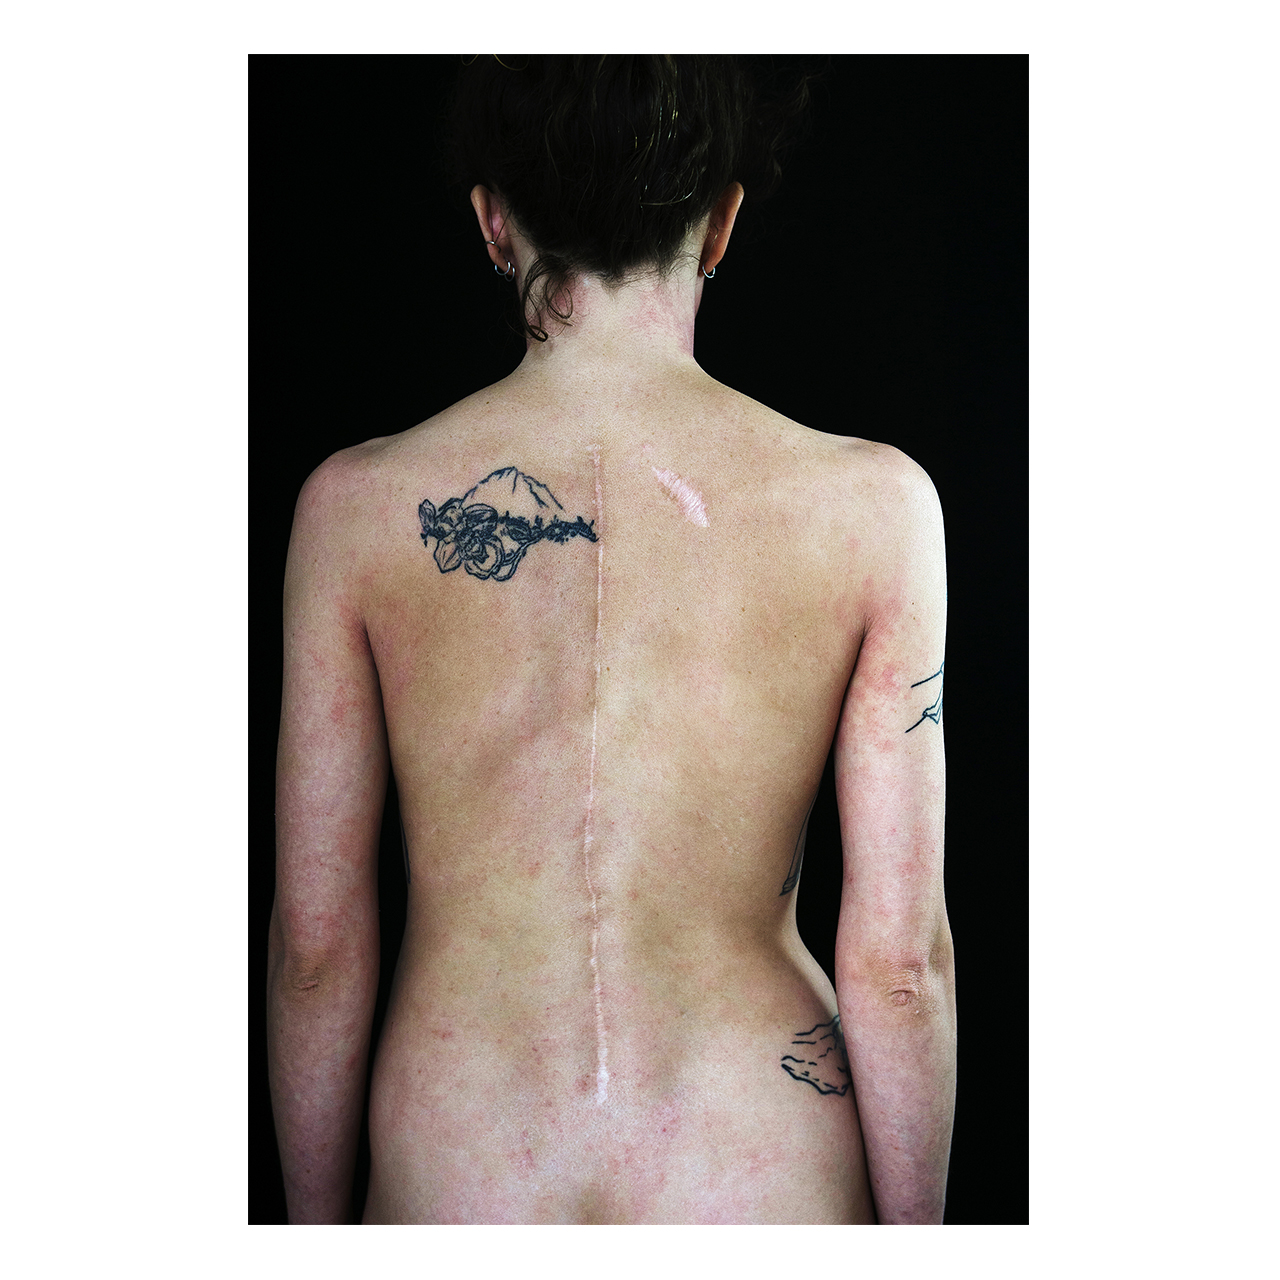 On Your Skin - Alessandro Didoni